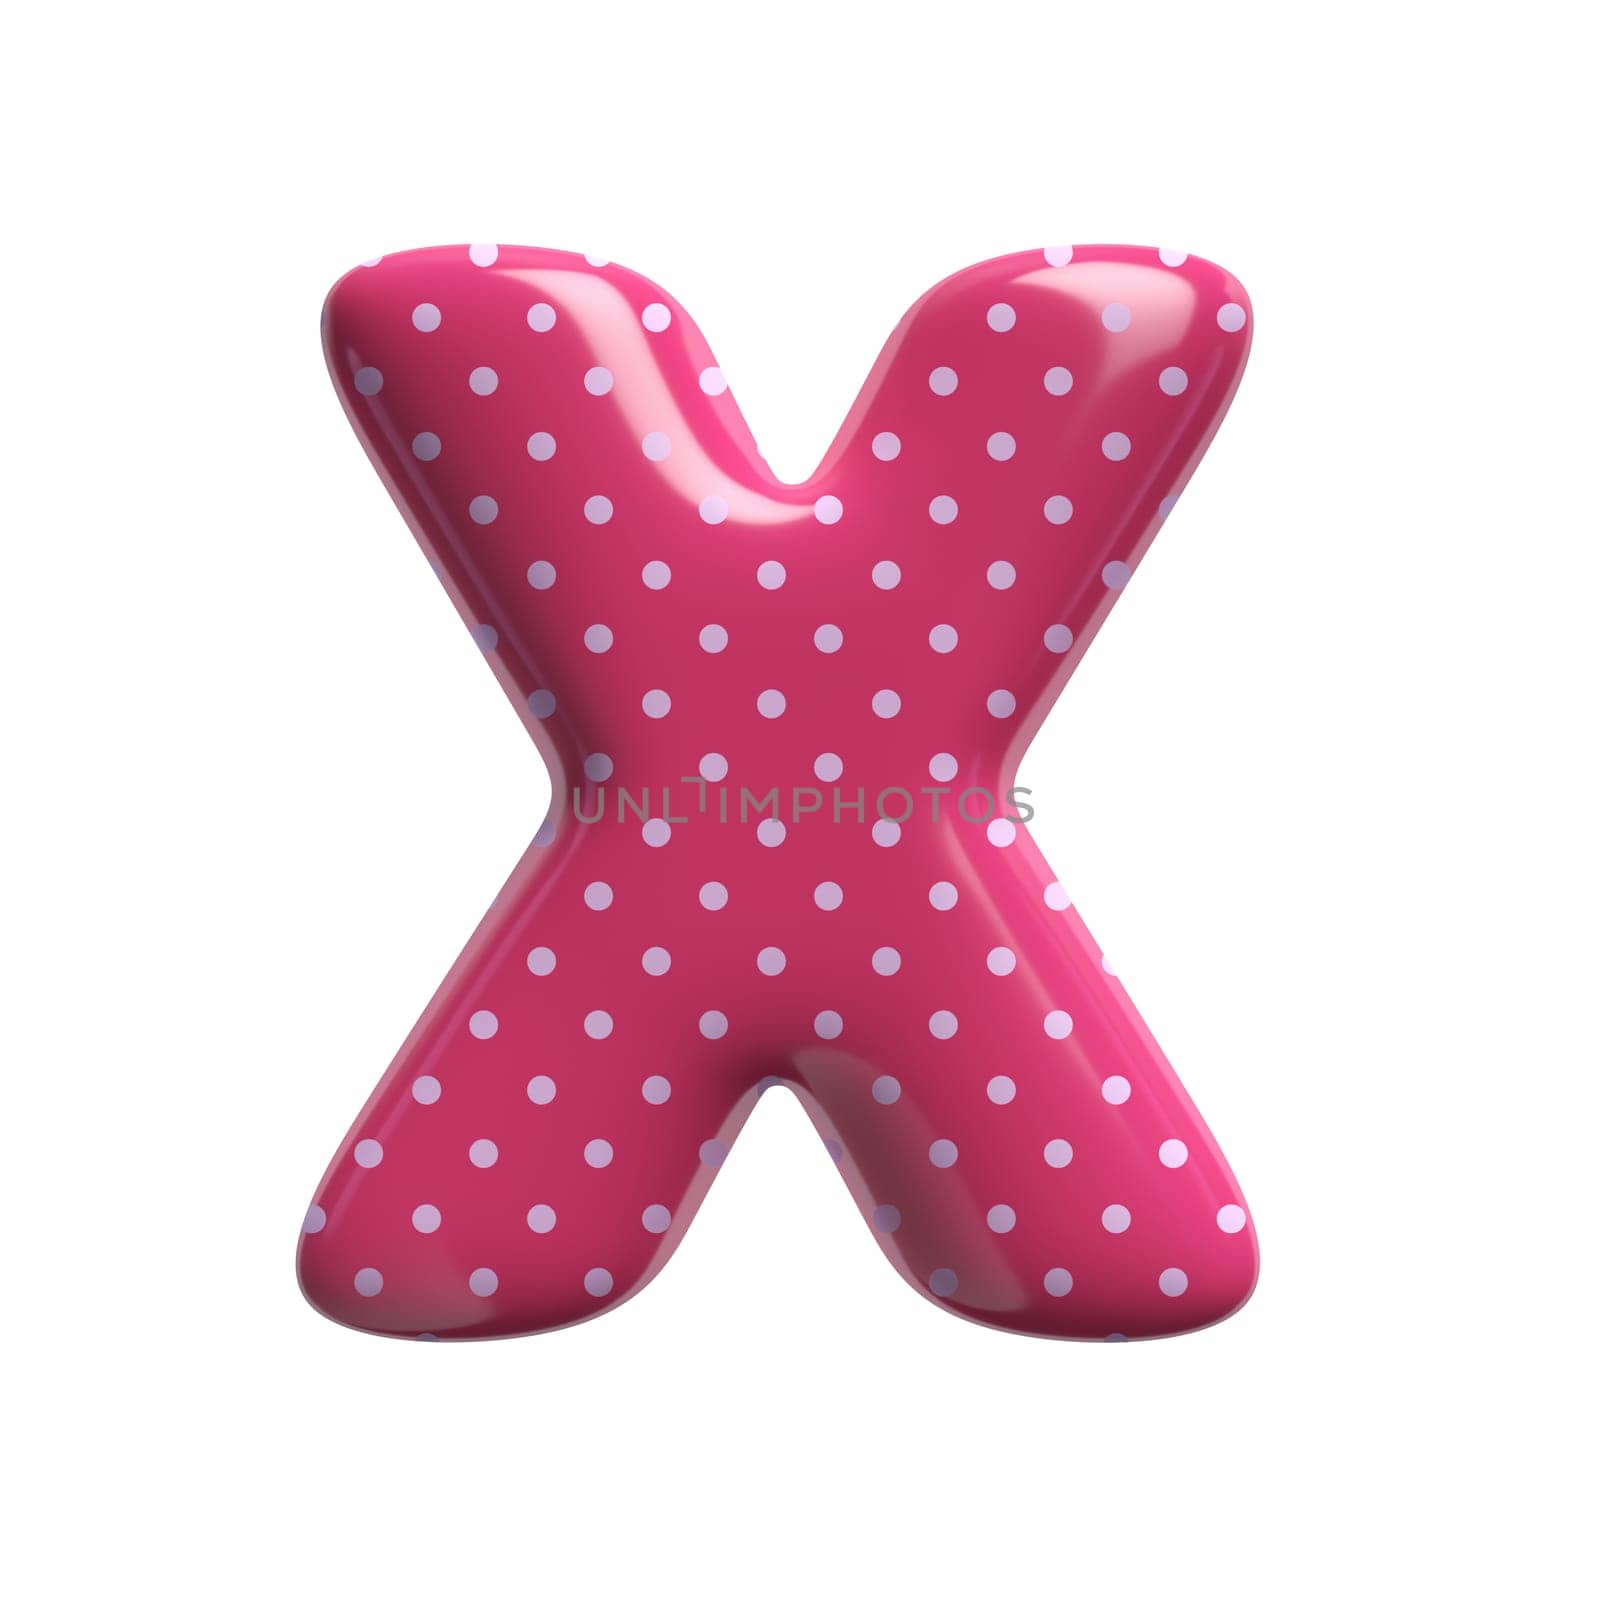 Polka dot letter X - Capital 3d pink retro font isolated on white background. This alphabet is perfect for creative illustrations related but not limited to Fashion, retro design, decoration...